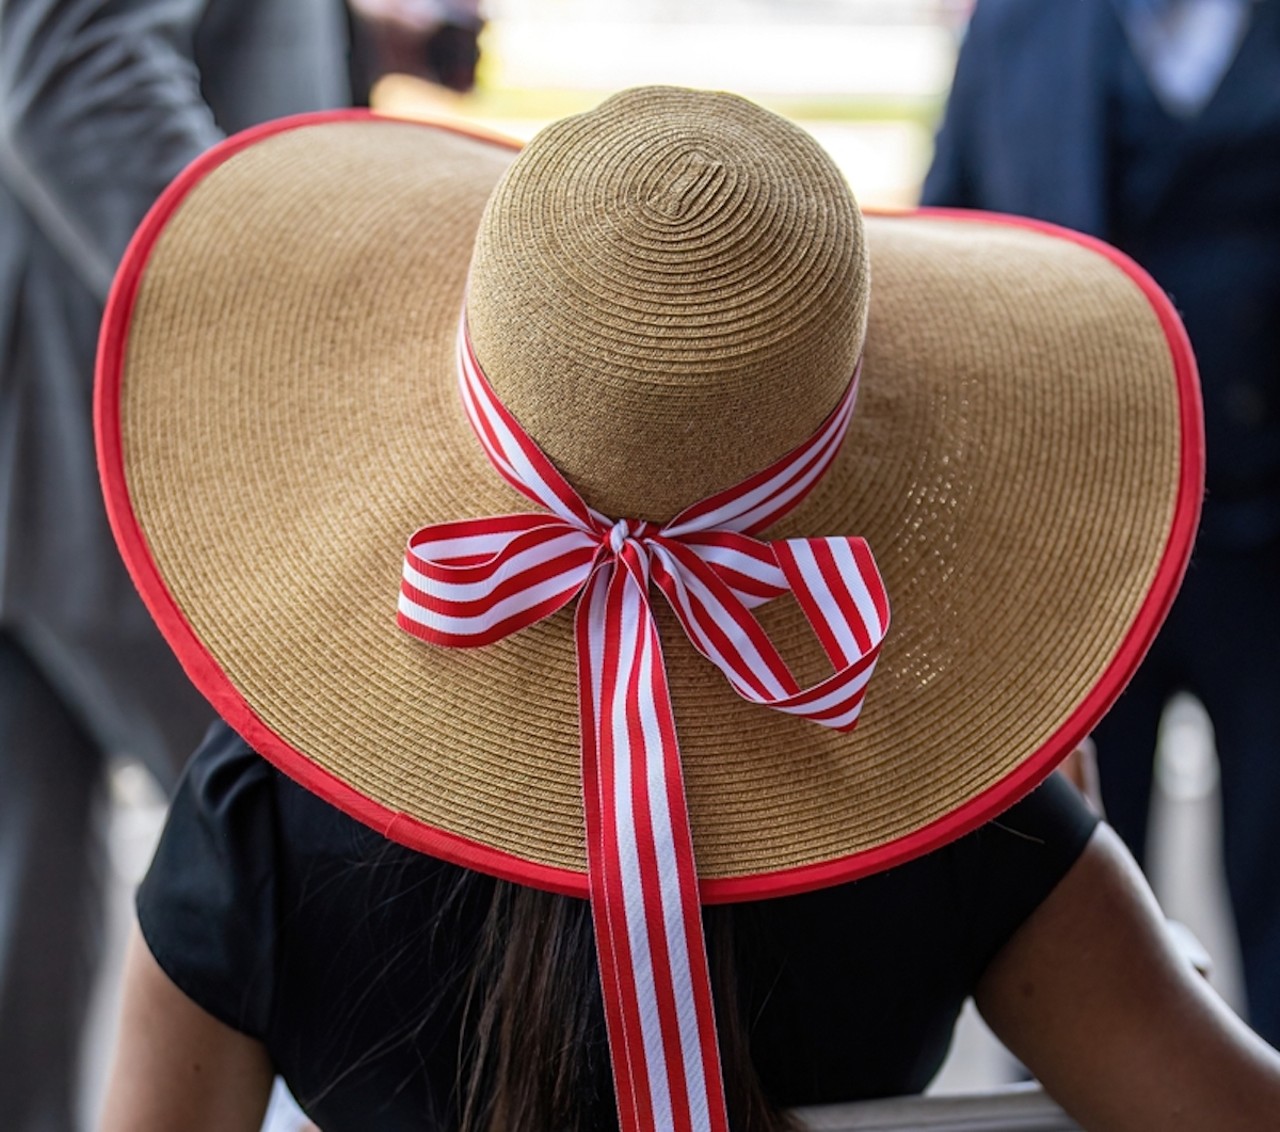 Florence
KENTUCKY DERBY Y’ALL. This hat sports red and white stripes similar to the iconic Florence Water Tower, a beacon for I-71/75’s weary travelers and those trying to remember where the mall’s exit is.